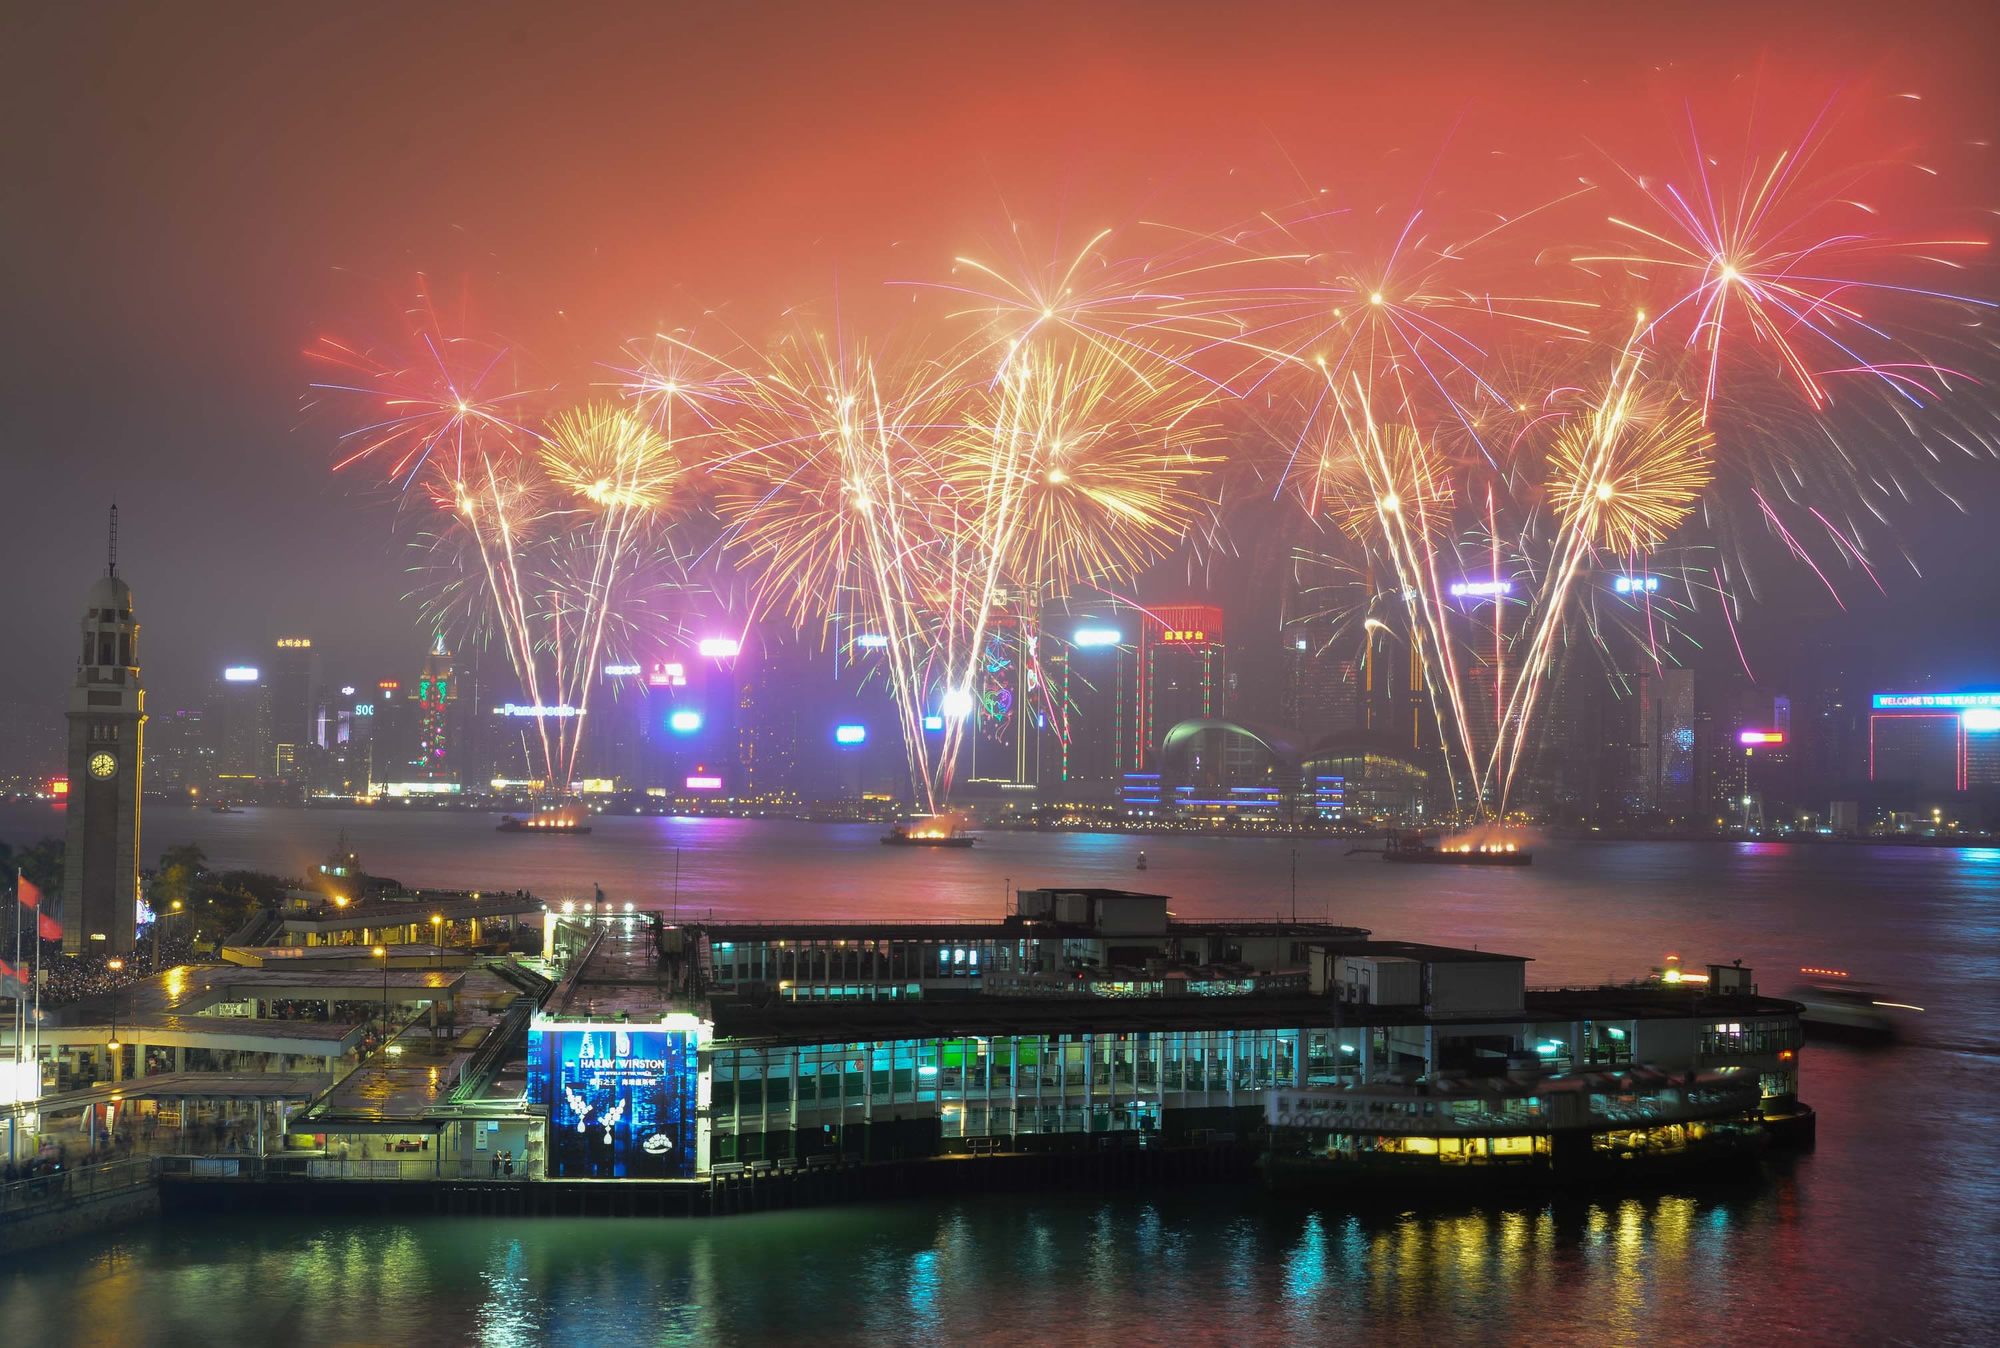 Fireworks light up sky over Hong Kong's Victoria Harbor for Chinese New